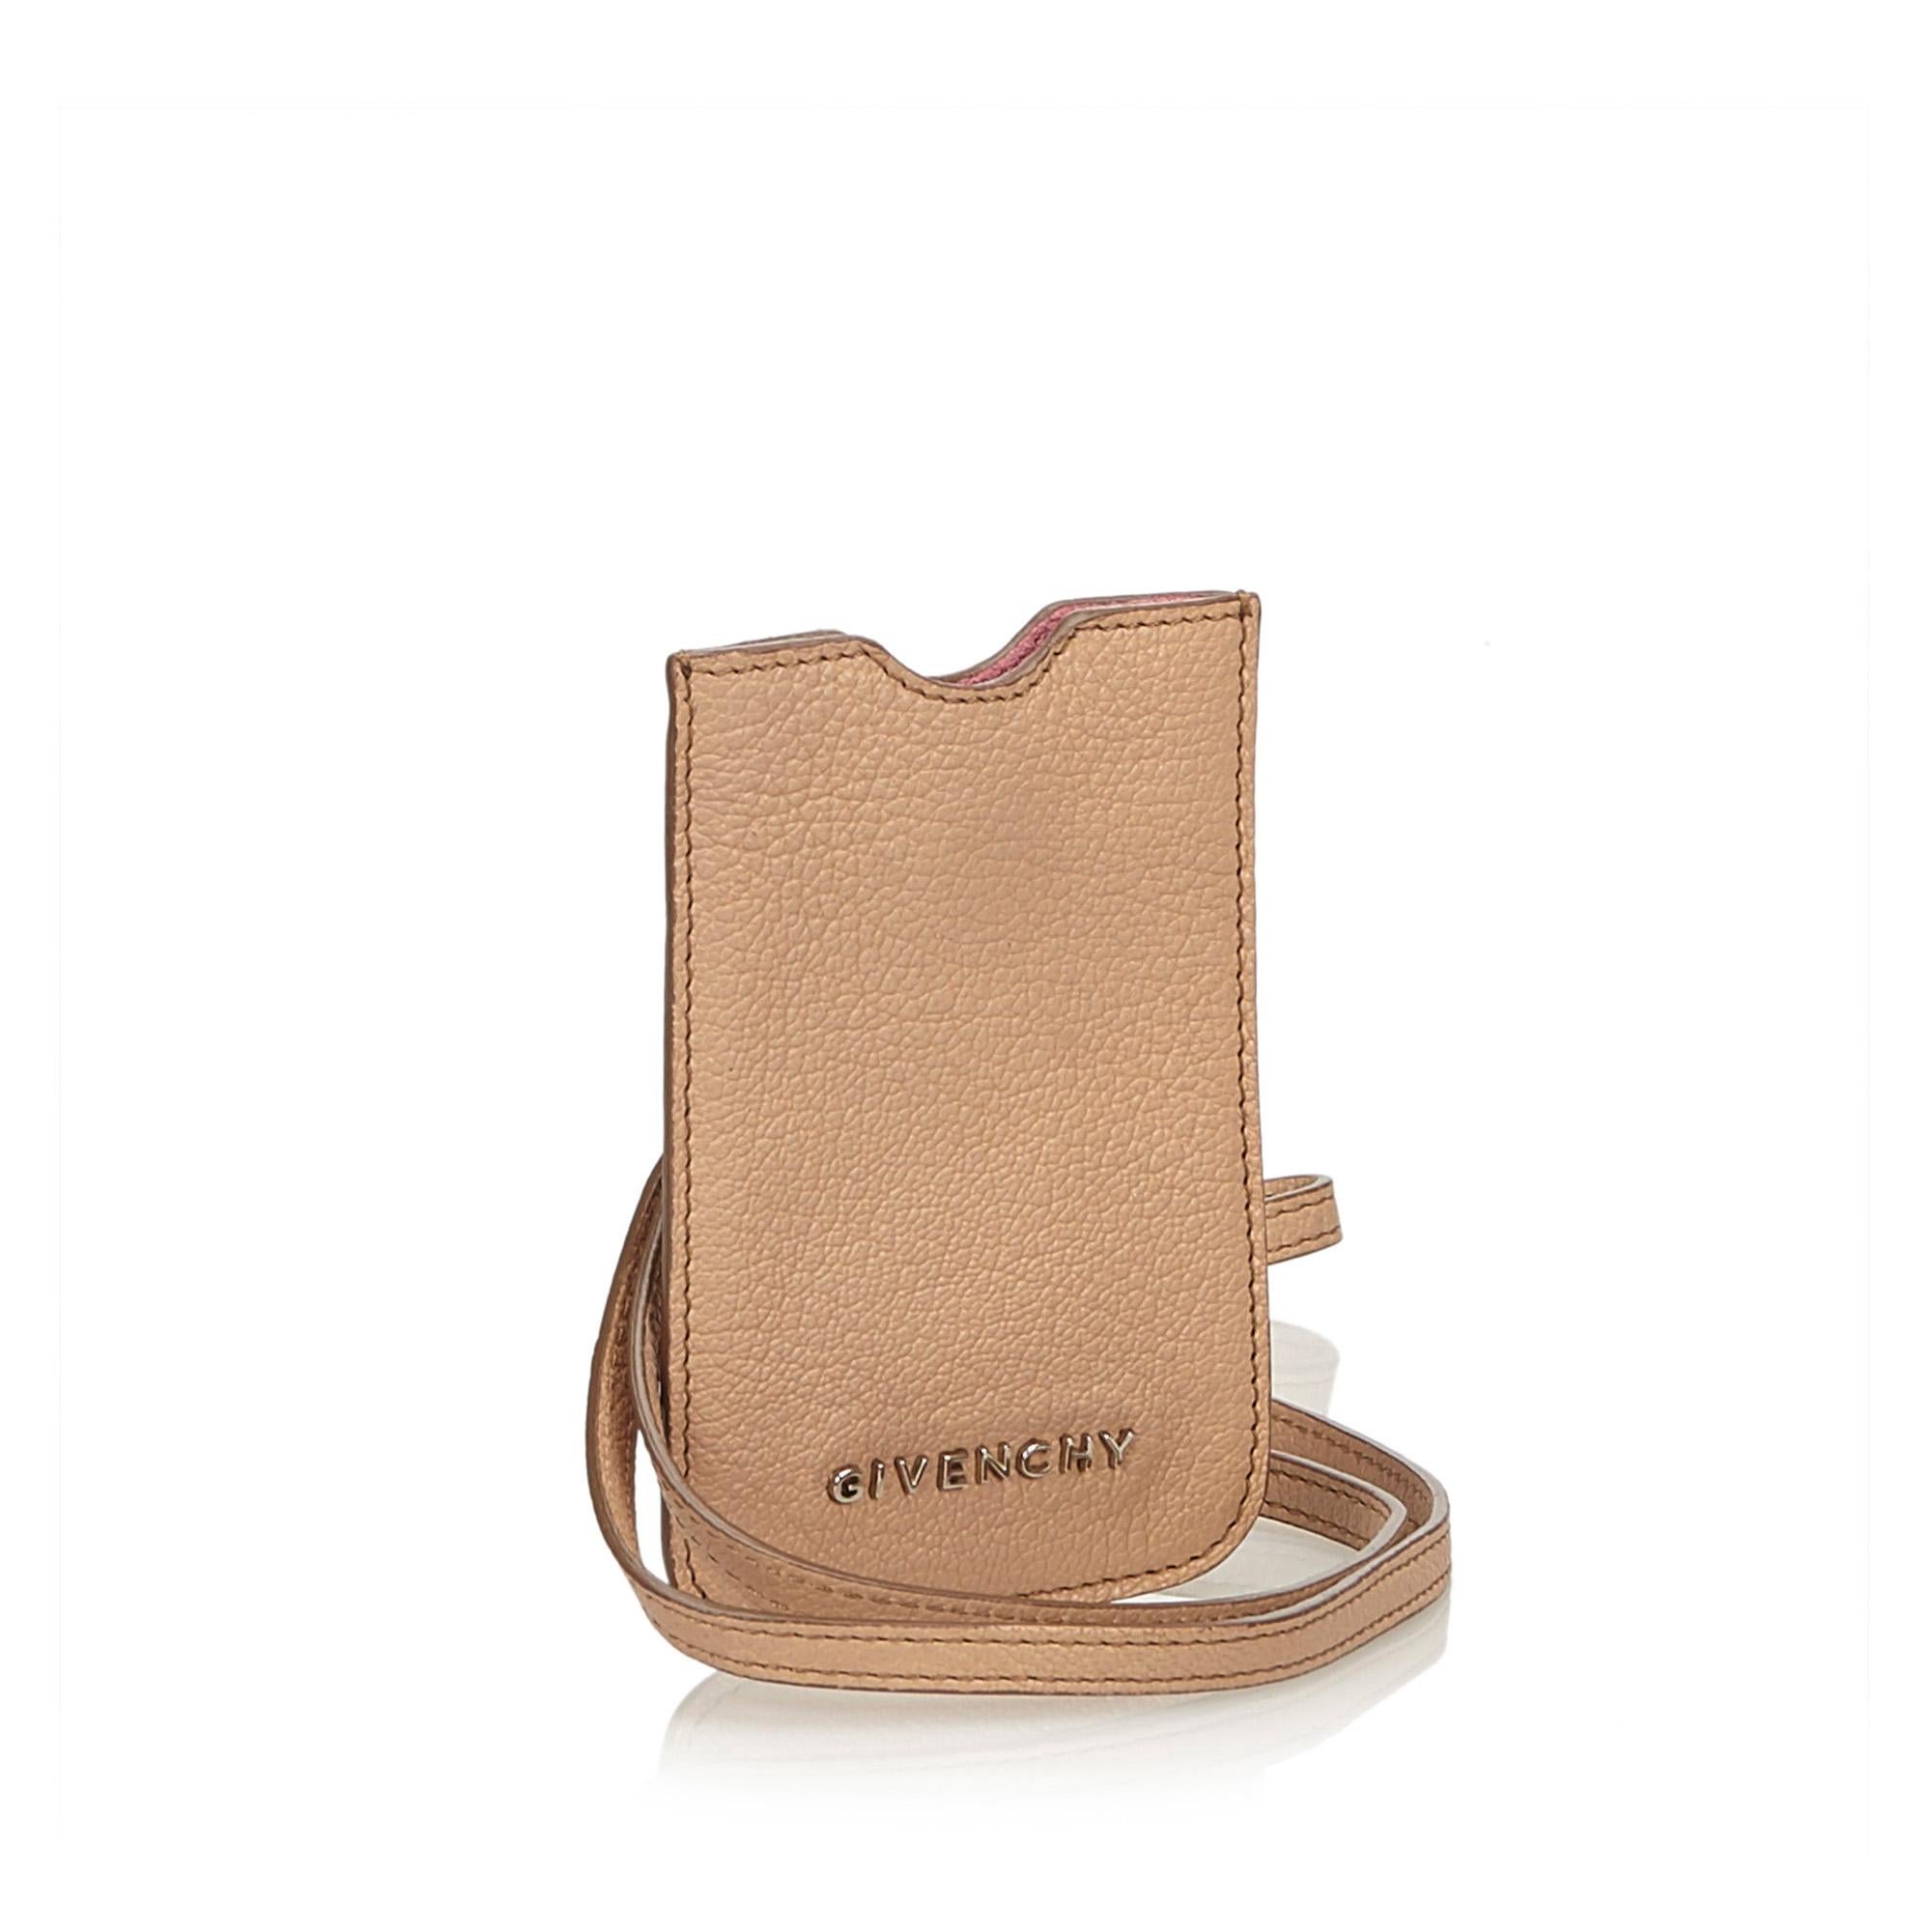 This phone case features a leather body and comes with a flat strap. It carries as AB condition rating.

Inclusions: 
This item does not come with inclusions.

Dimensions:
Length: 8.00 cm
Width: 12.00 cm

Material: Leather x Others
Country of